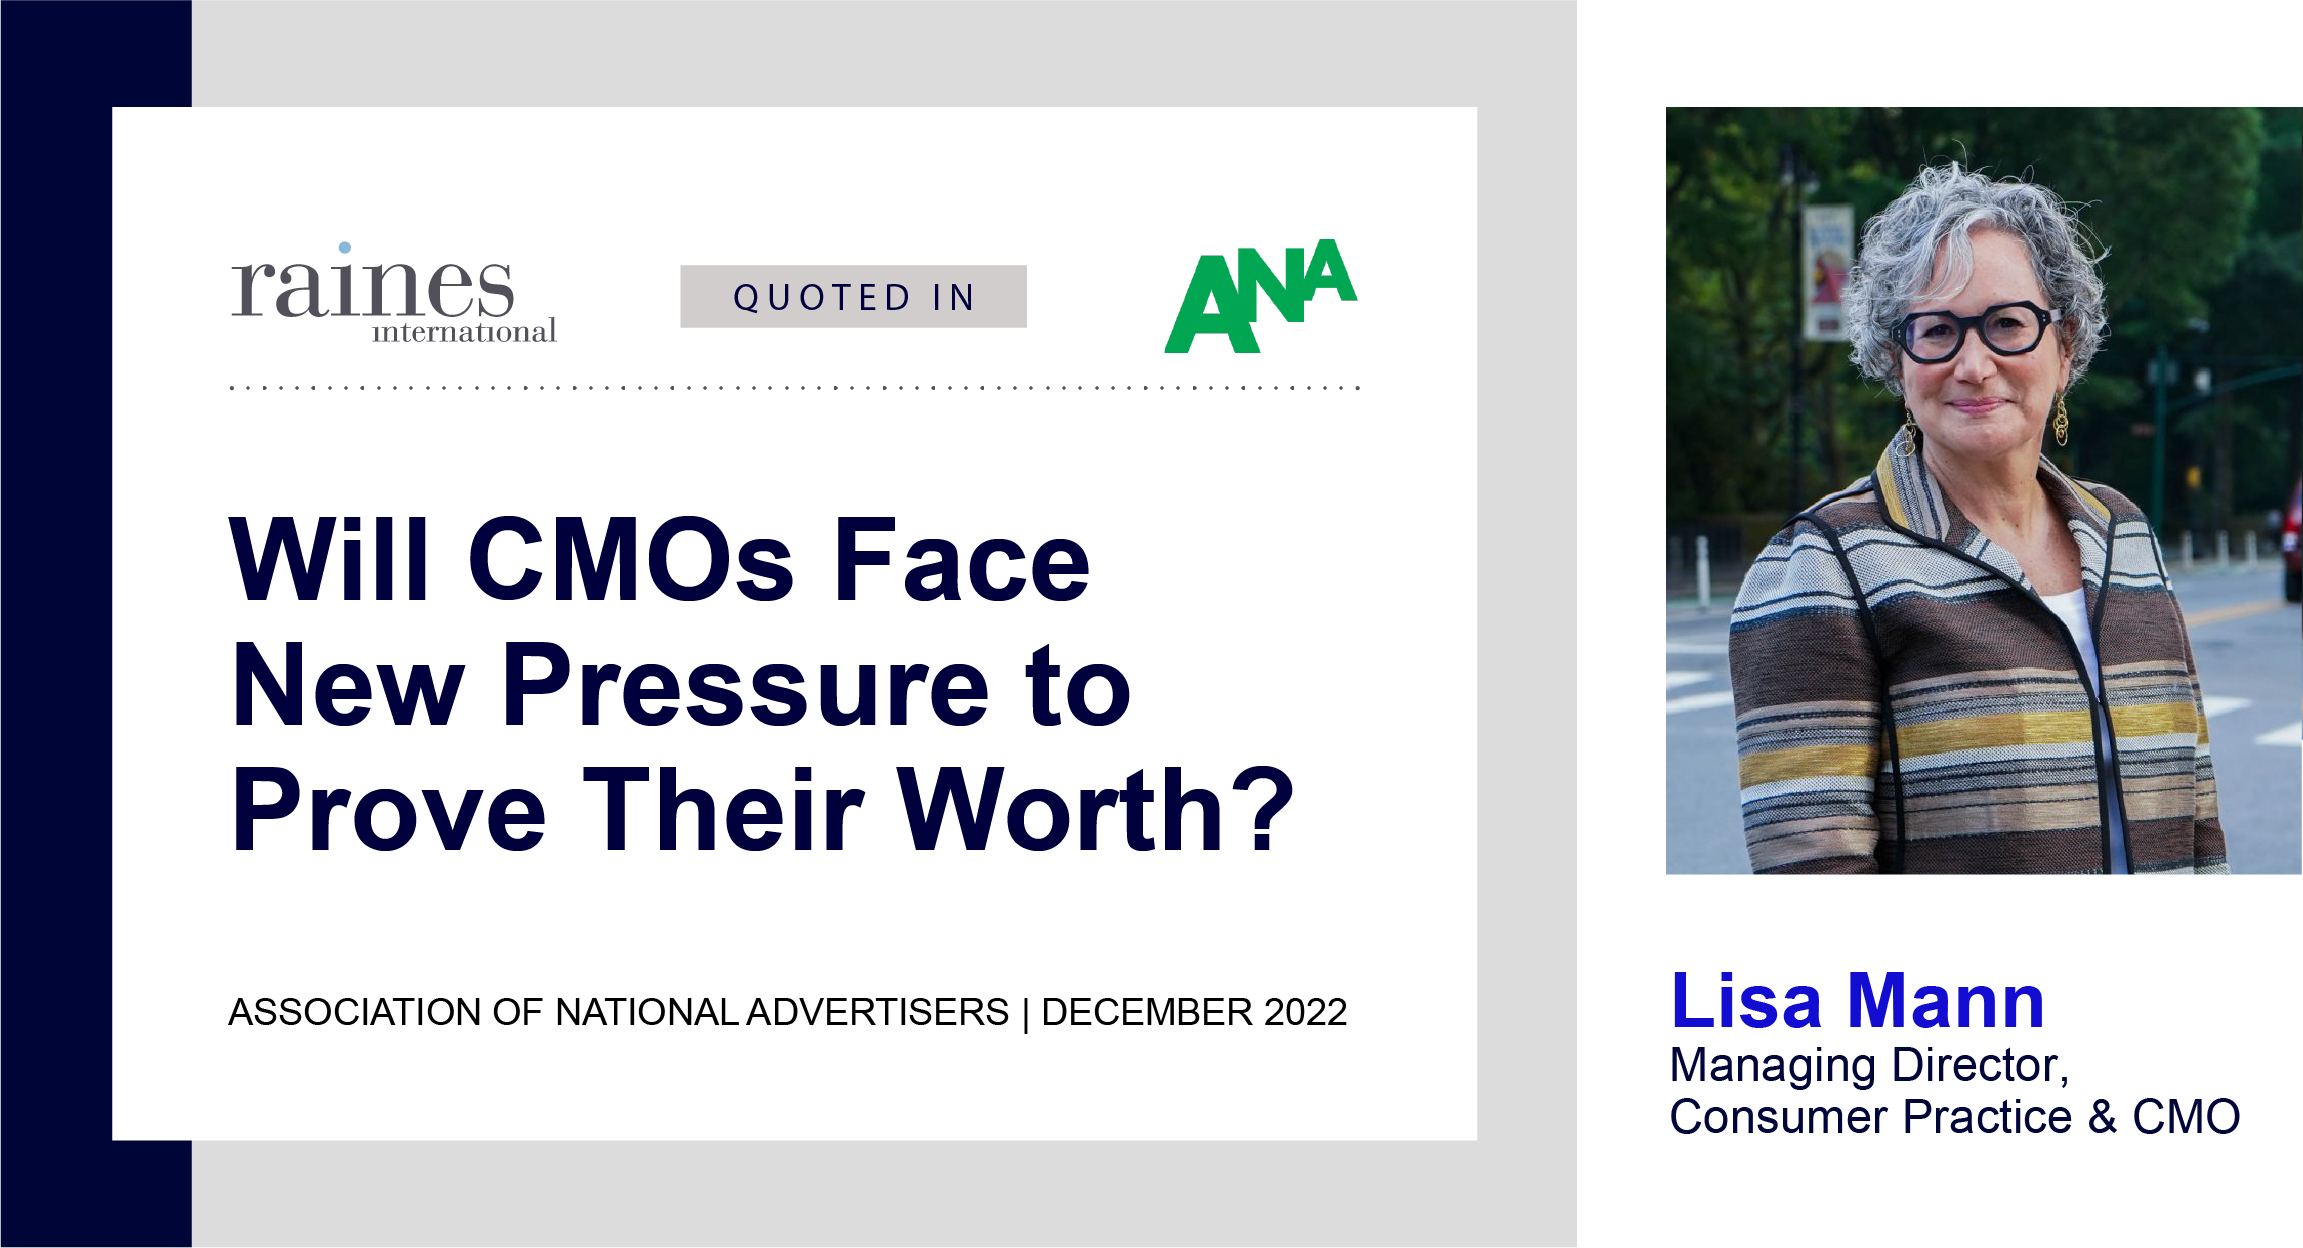 Raines featured in Association of National Advertisers, headline Will CMOS face new pressure to prove their worth? Headshot Lisa Mann, Chief Marketing Officer, Raines